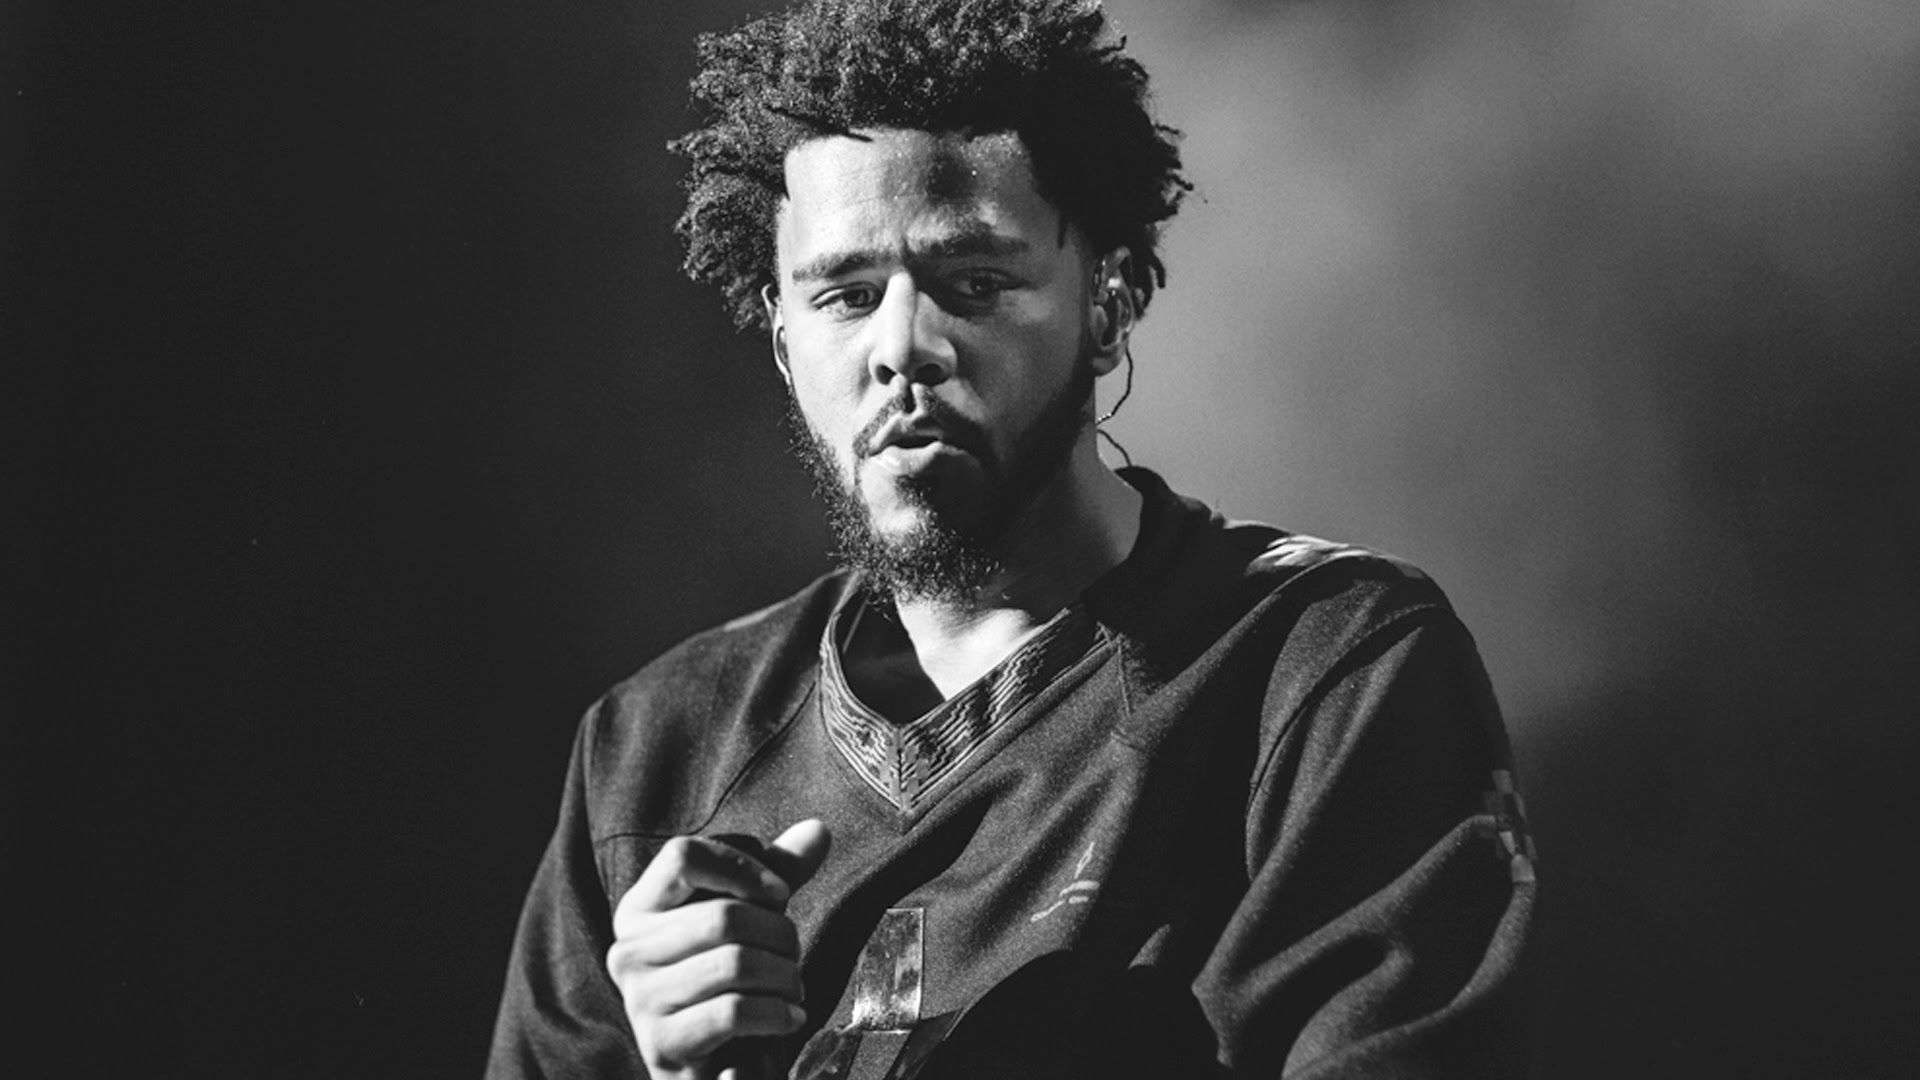 Download J. Cole HD Picture, Ultra HD Image, And 4k Desktop